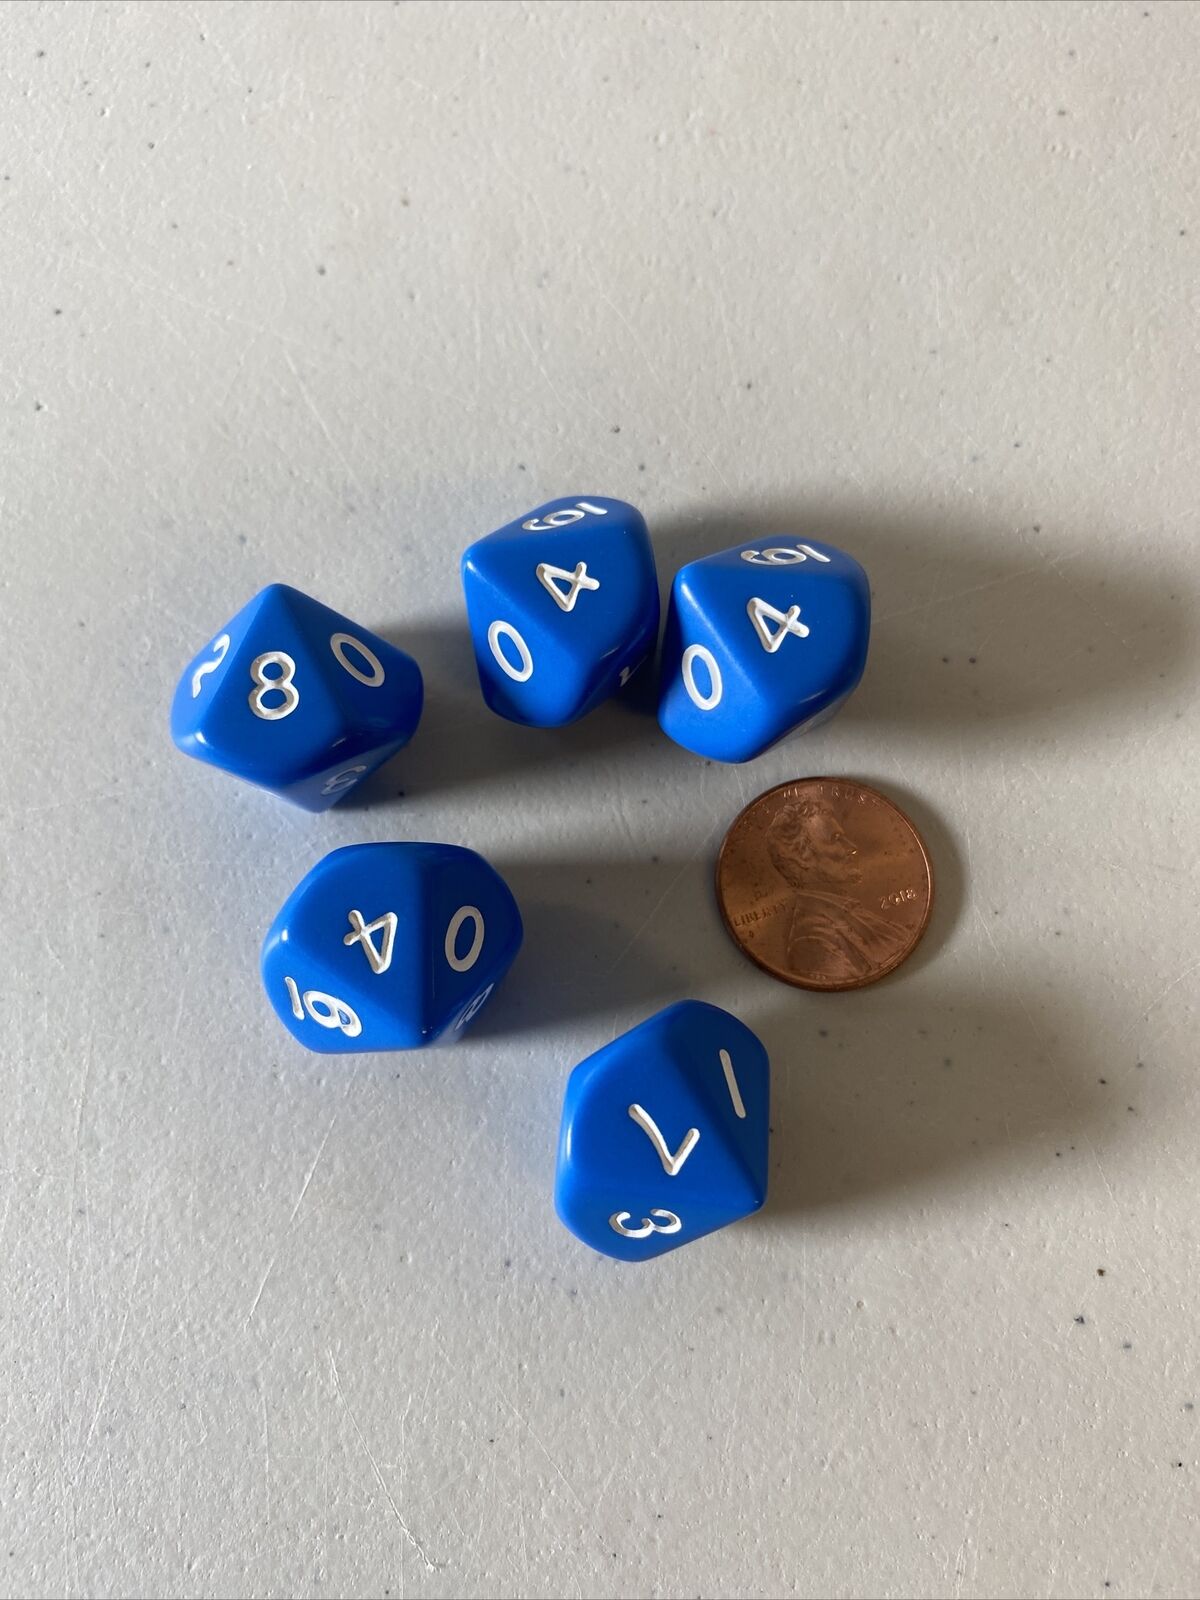 Pack of 5 D10 10-Sided Dice - Blue with White Numbers